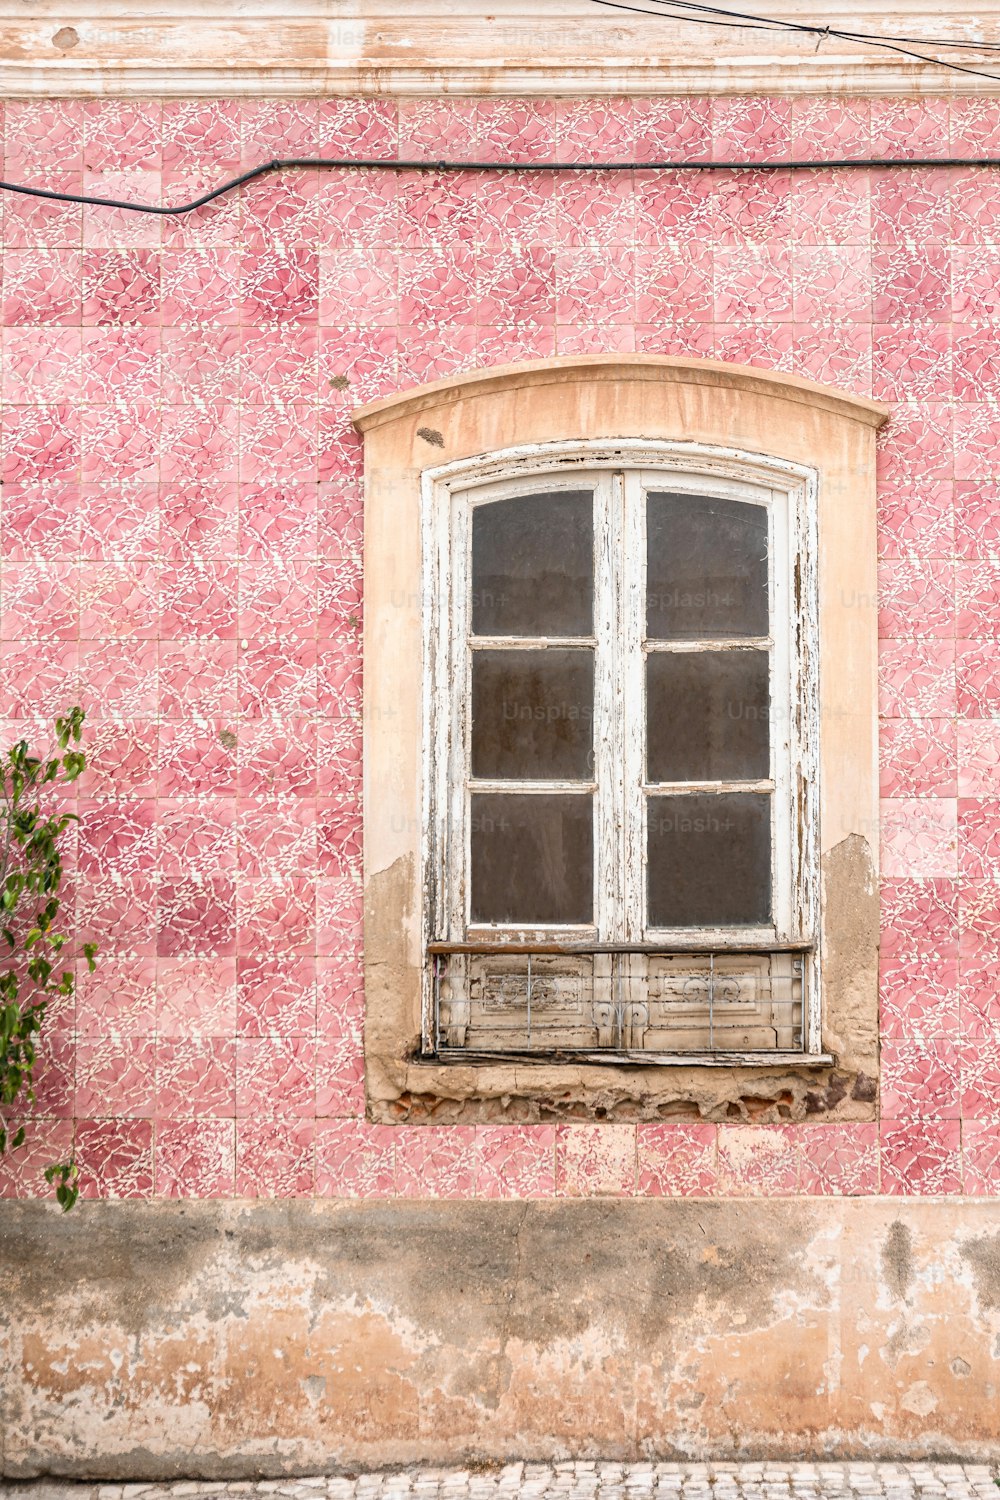 a window on the side of a pink building